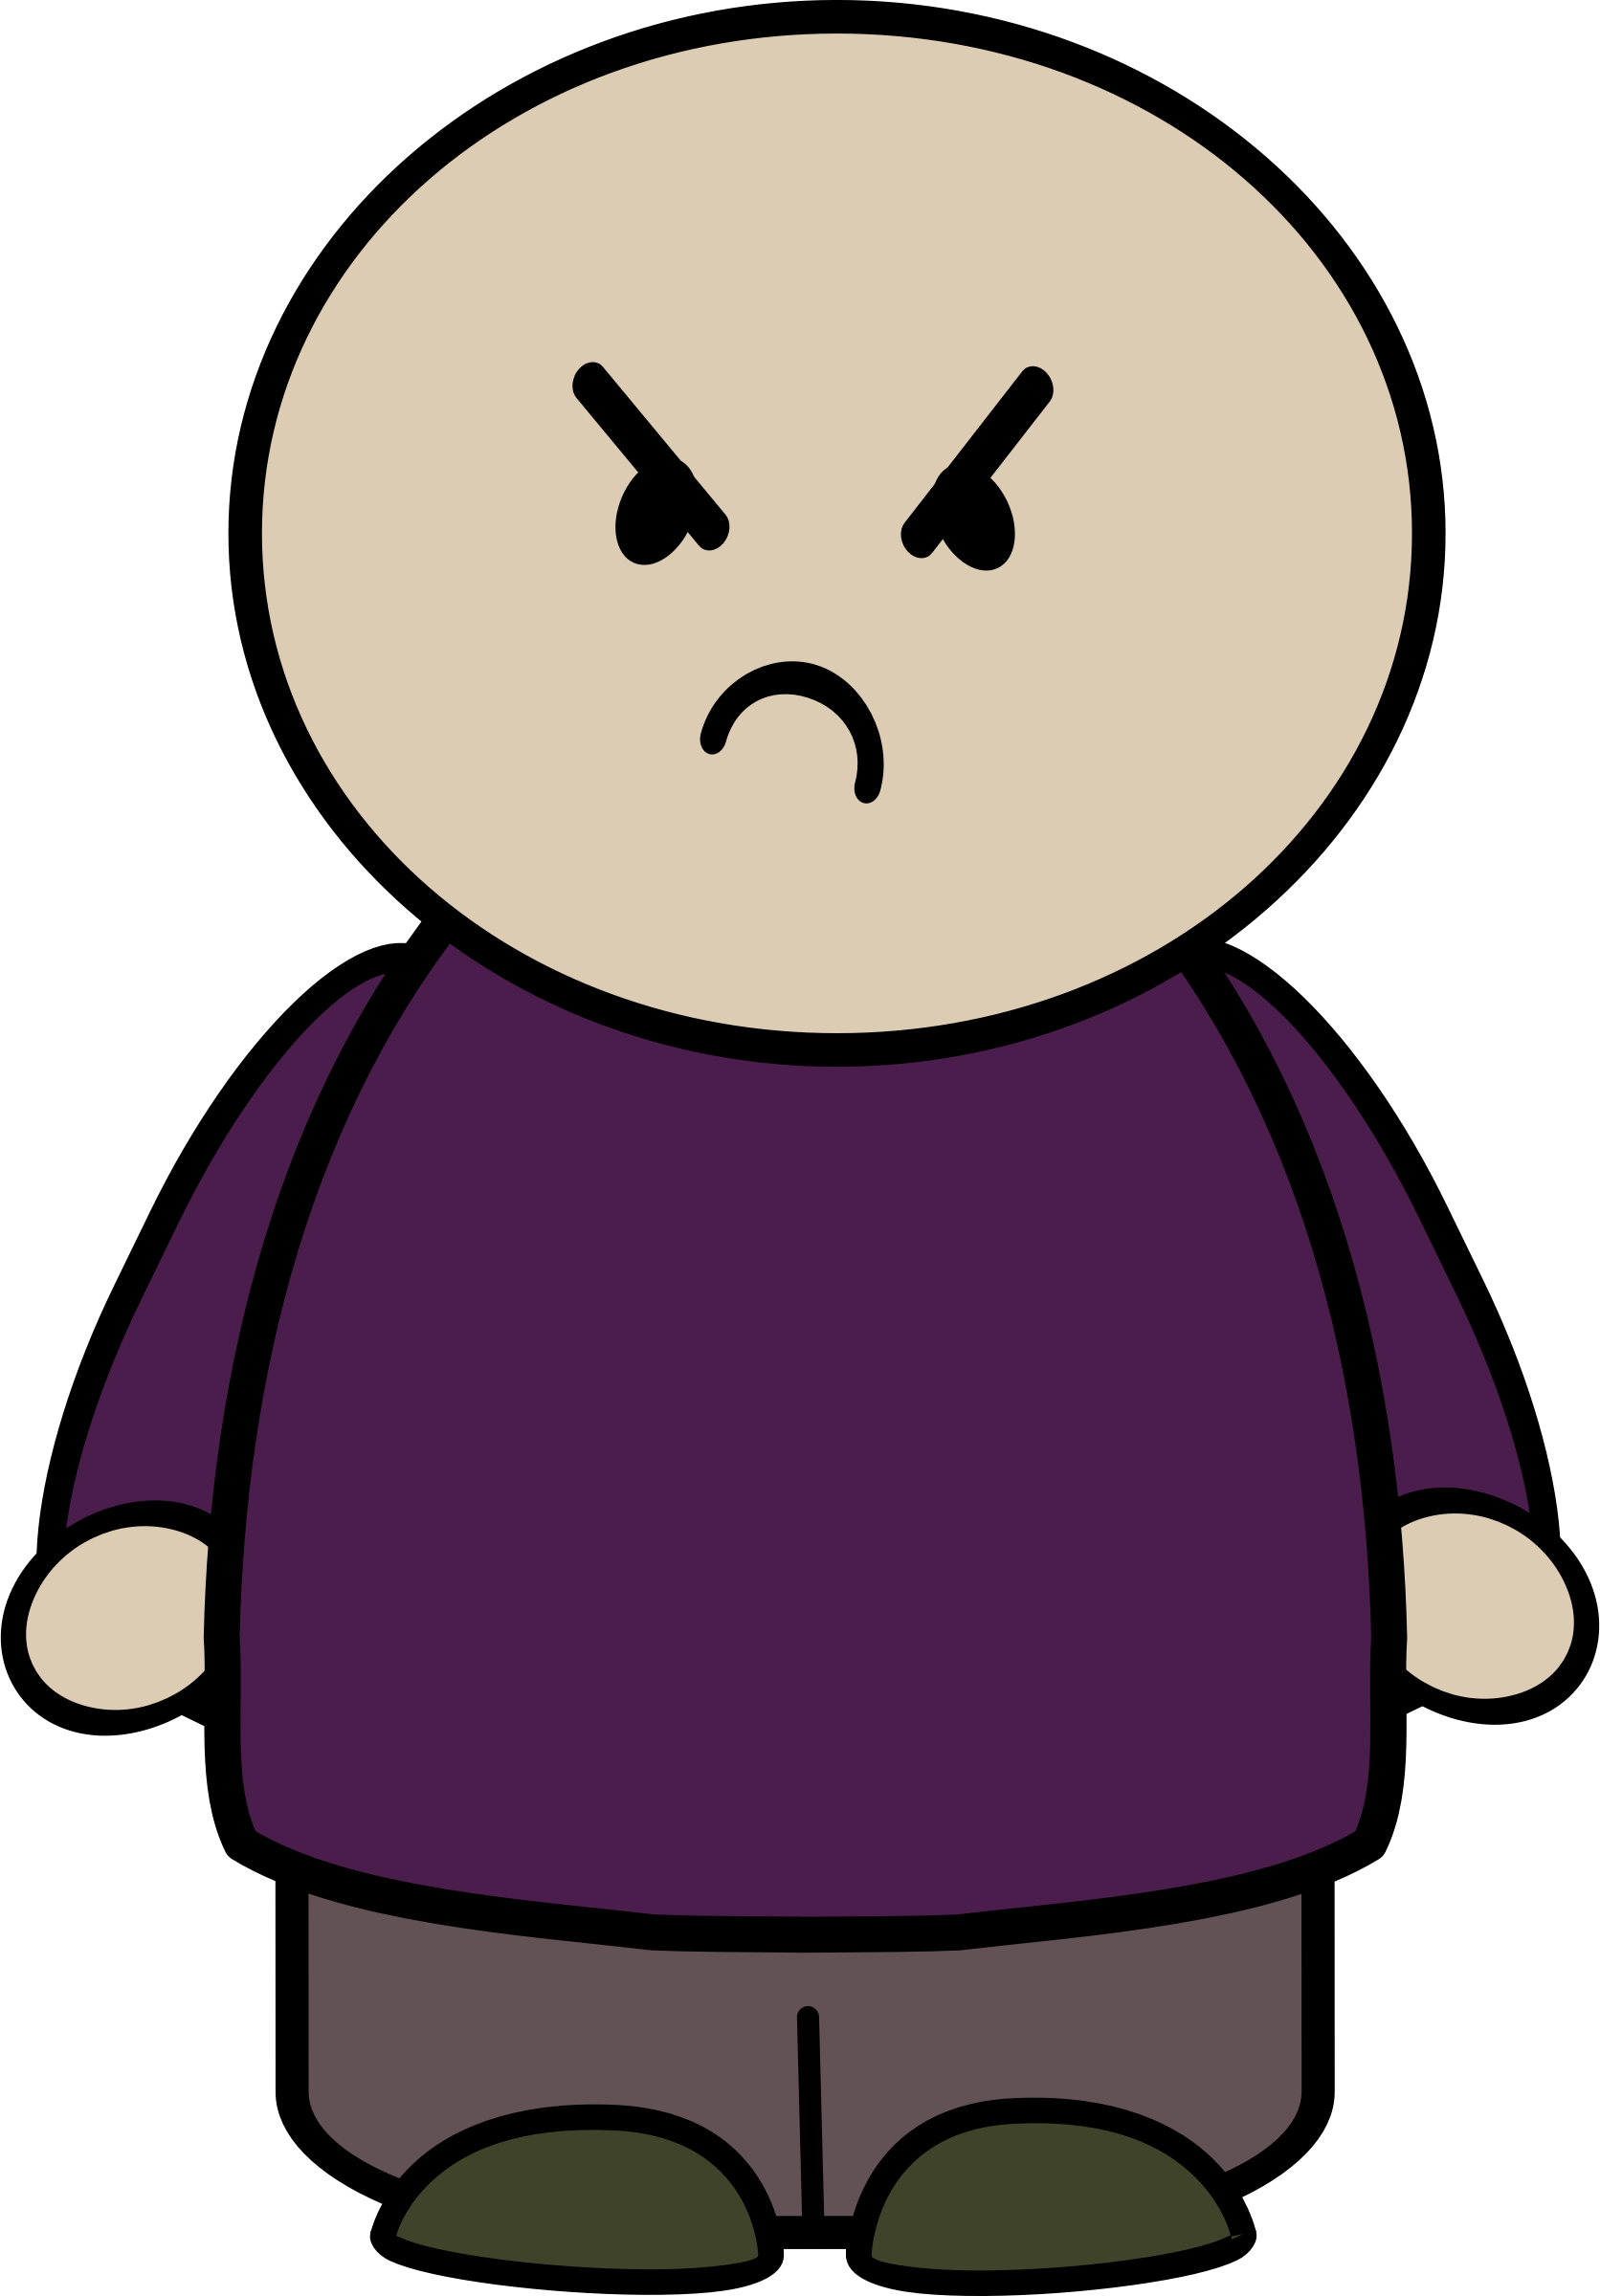 A Cartoon Of A Person With A Angry Face